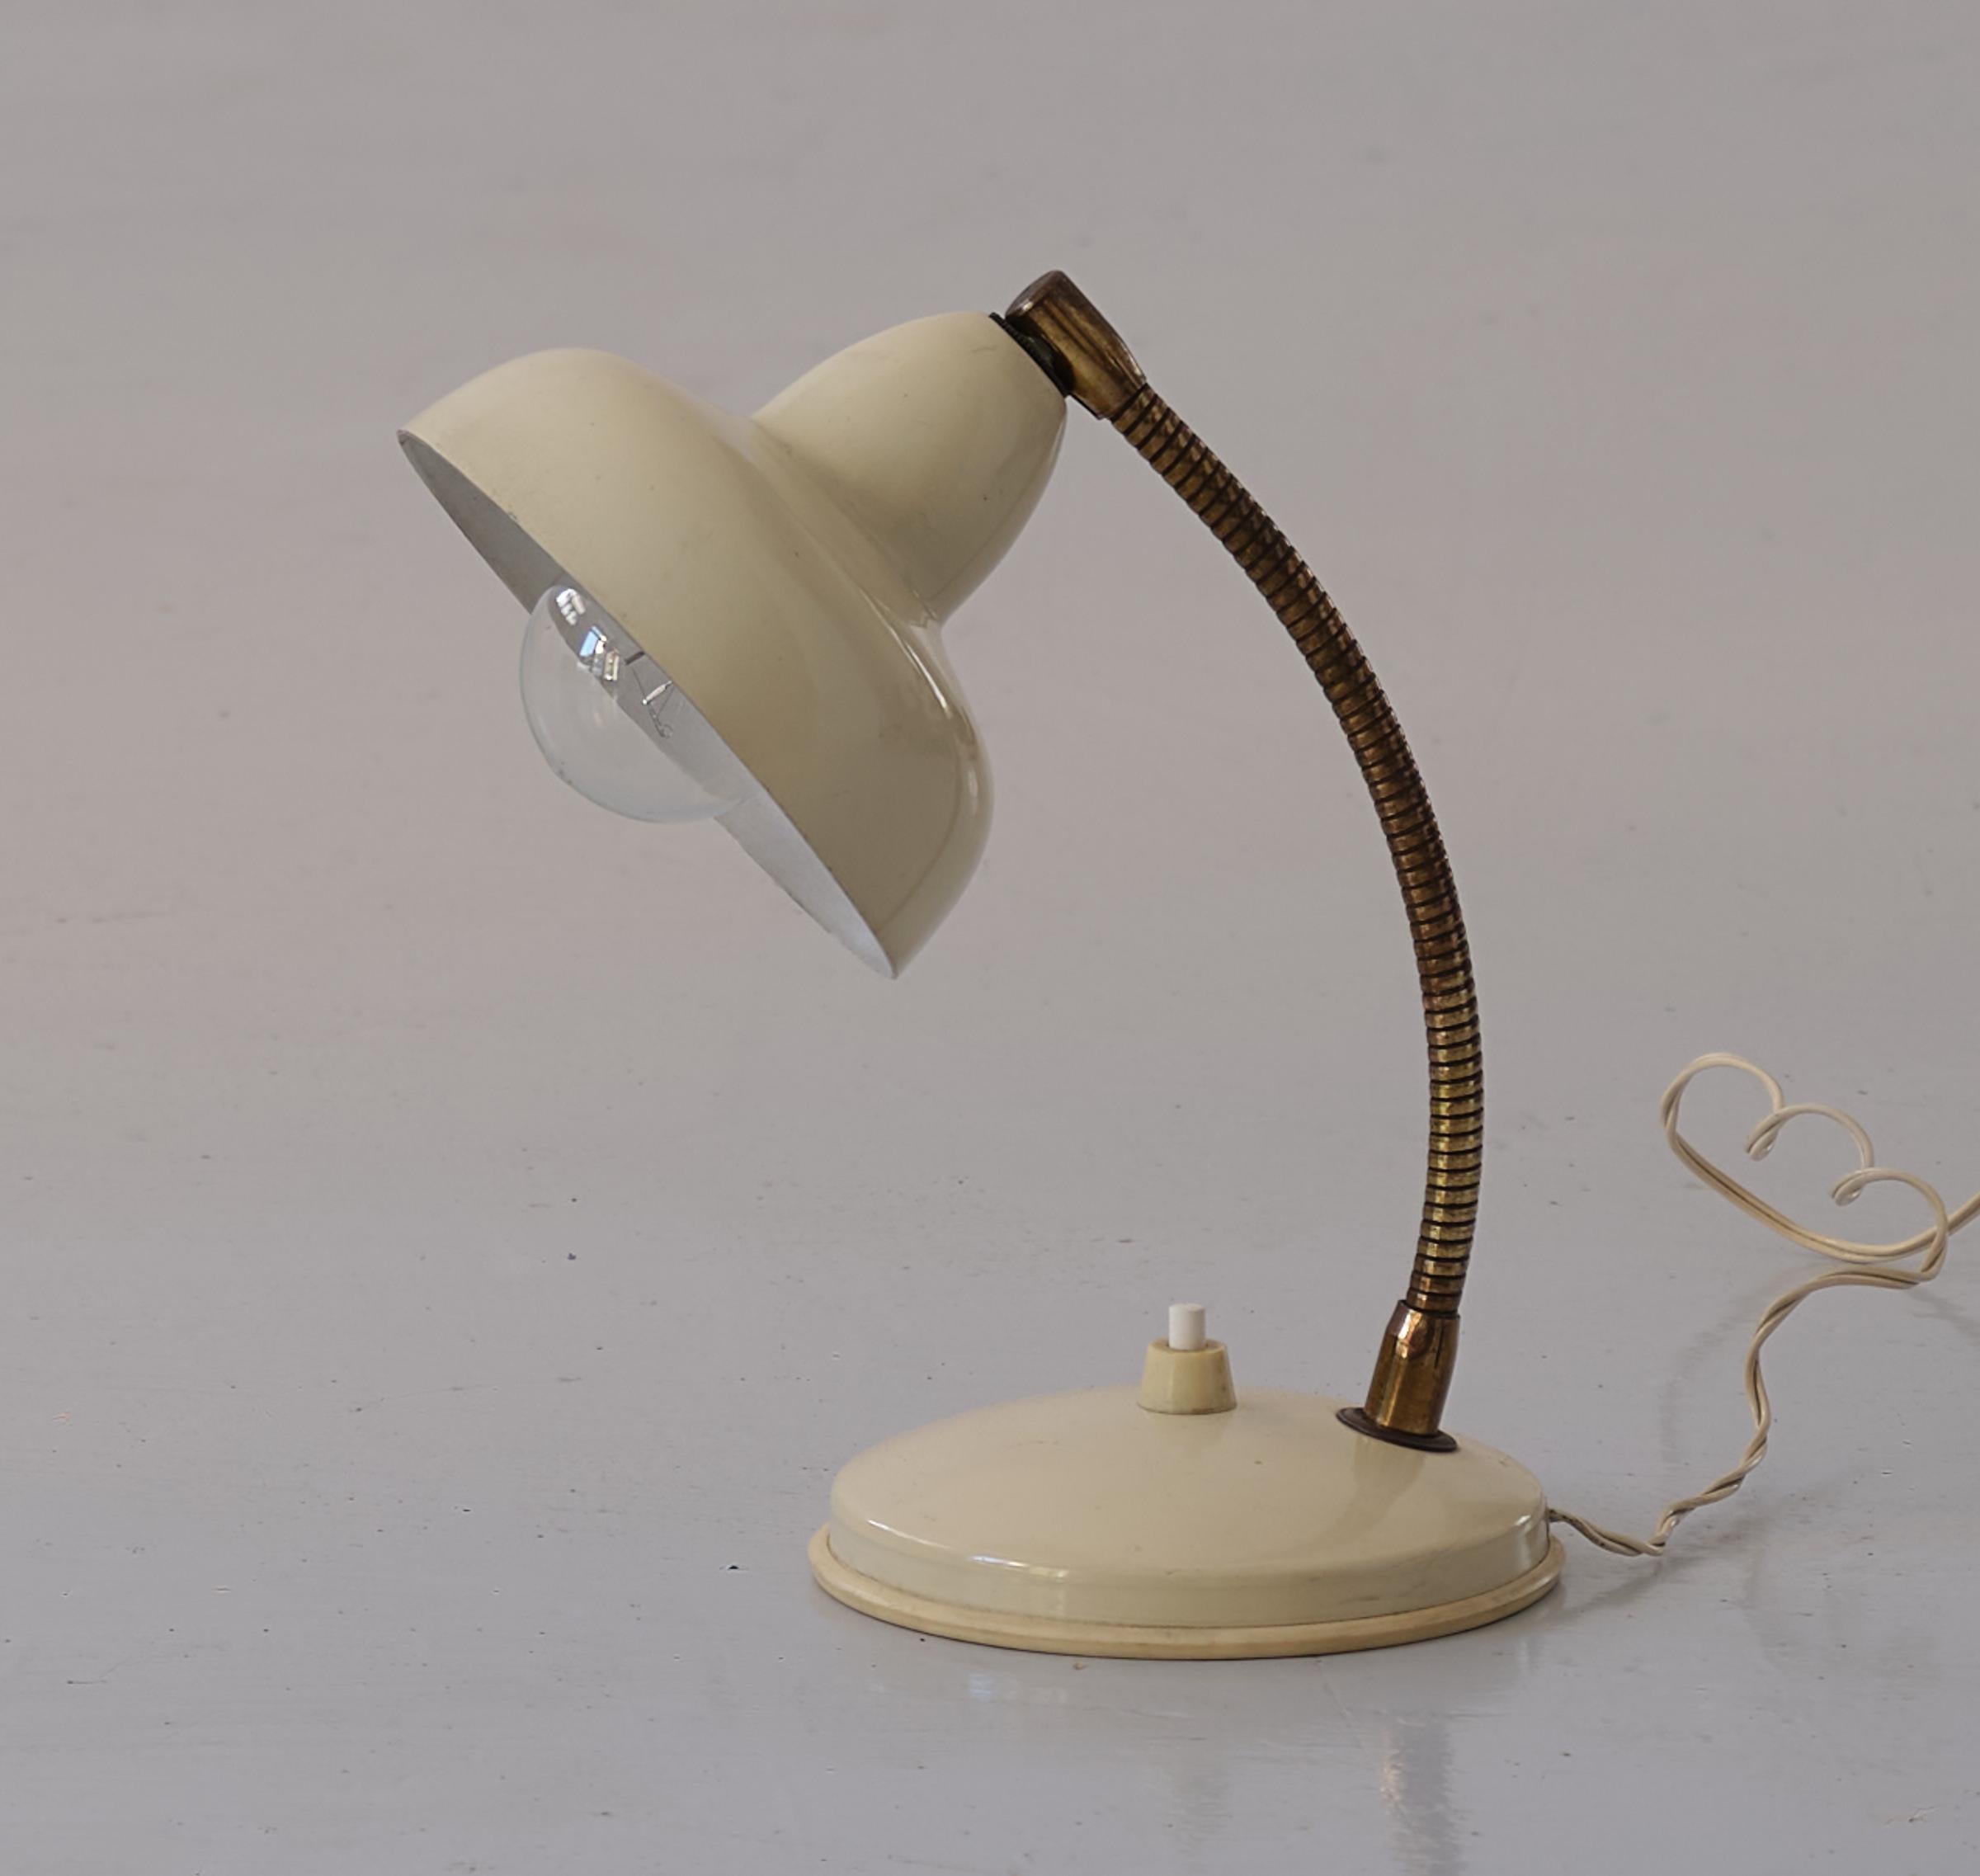 Small vintage table or bedside lamp, made of brass and cream-colored enamelled metal , Italy , 1950's .

This abat jour is in good vintage condition.
Original working wire with standard E14 bulbs. We can supply USA plug adapter if needed.